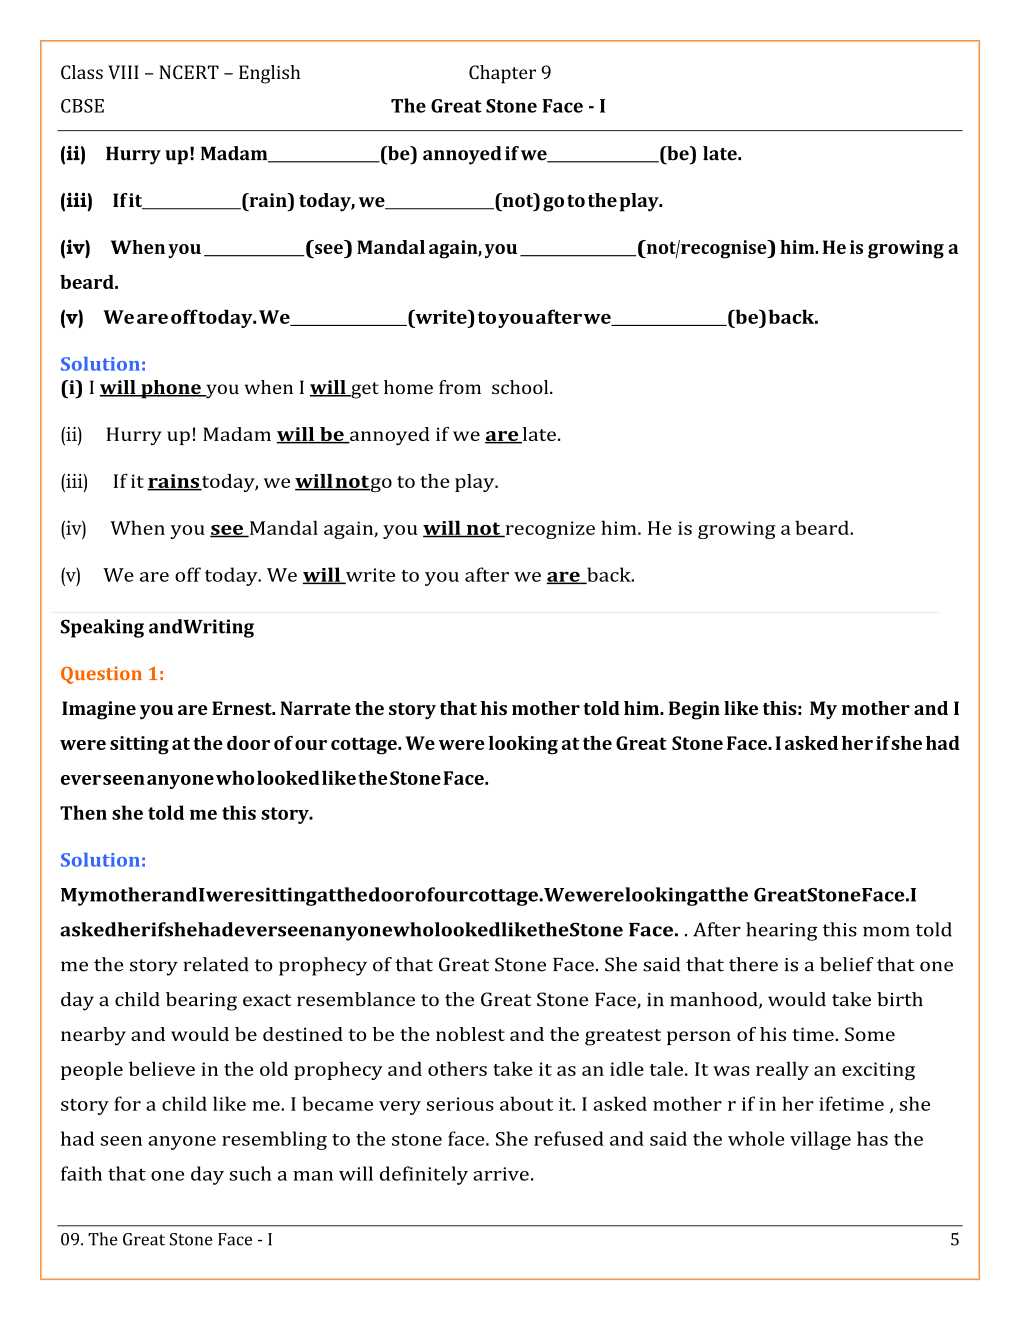 NCERT Solutions For Class 8 English Honey Dew Chapter 9 